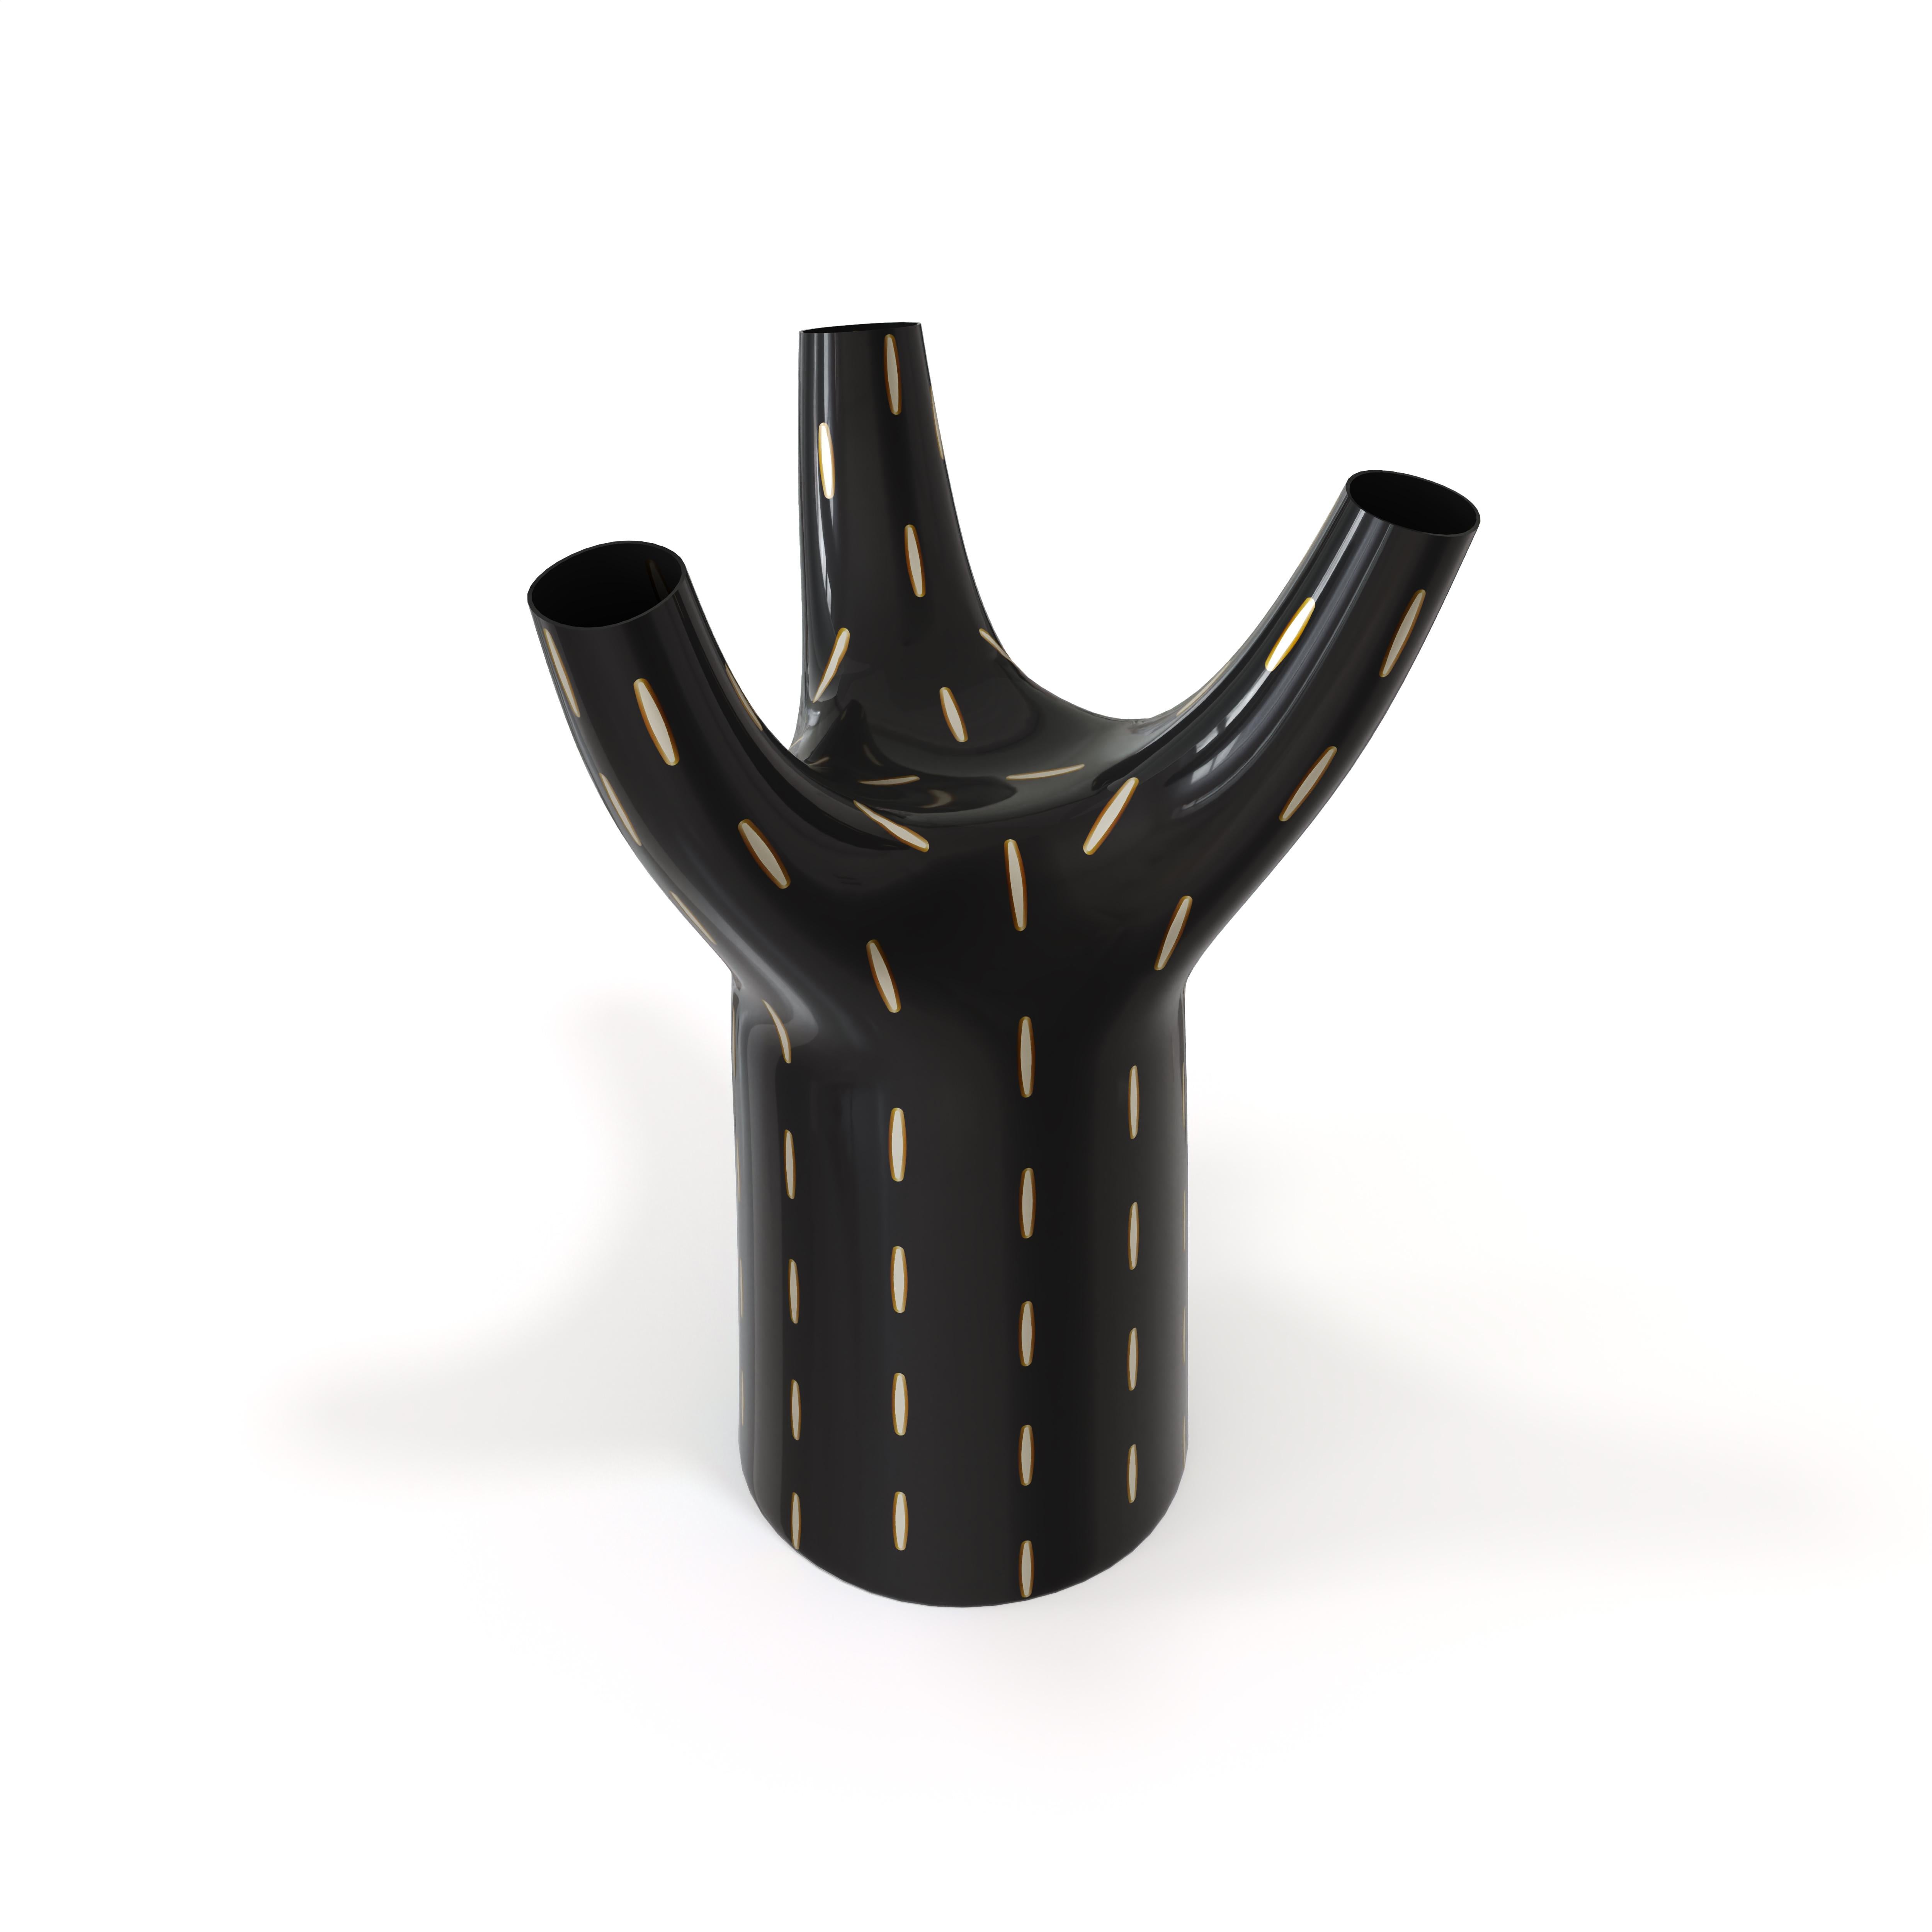 Tree Vase is an unusual shape in a vase, with intricate brass and resin inlay on black. It is fun, elegant and its three branches open up to hold flowers. 

For his debut creations, Marcantonio introduced “Vegetal Animal”, a concept that evokes